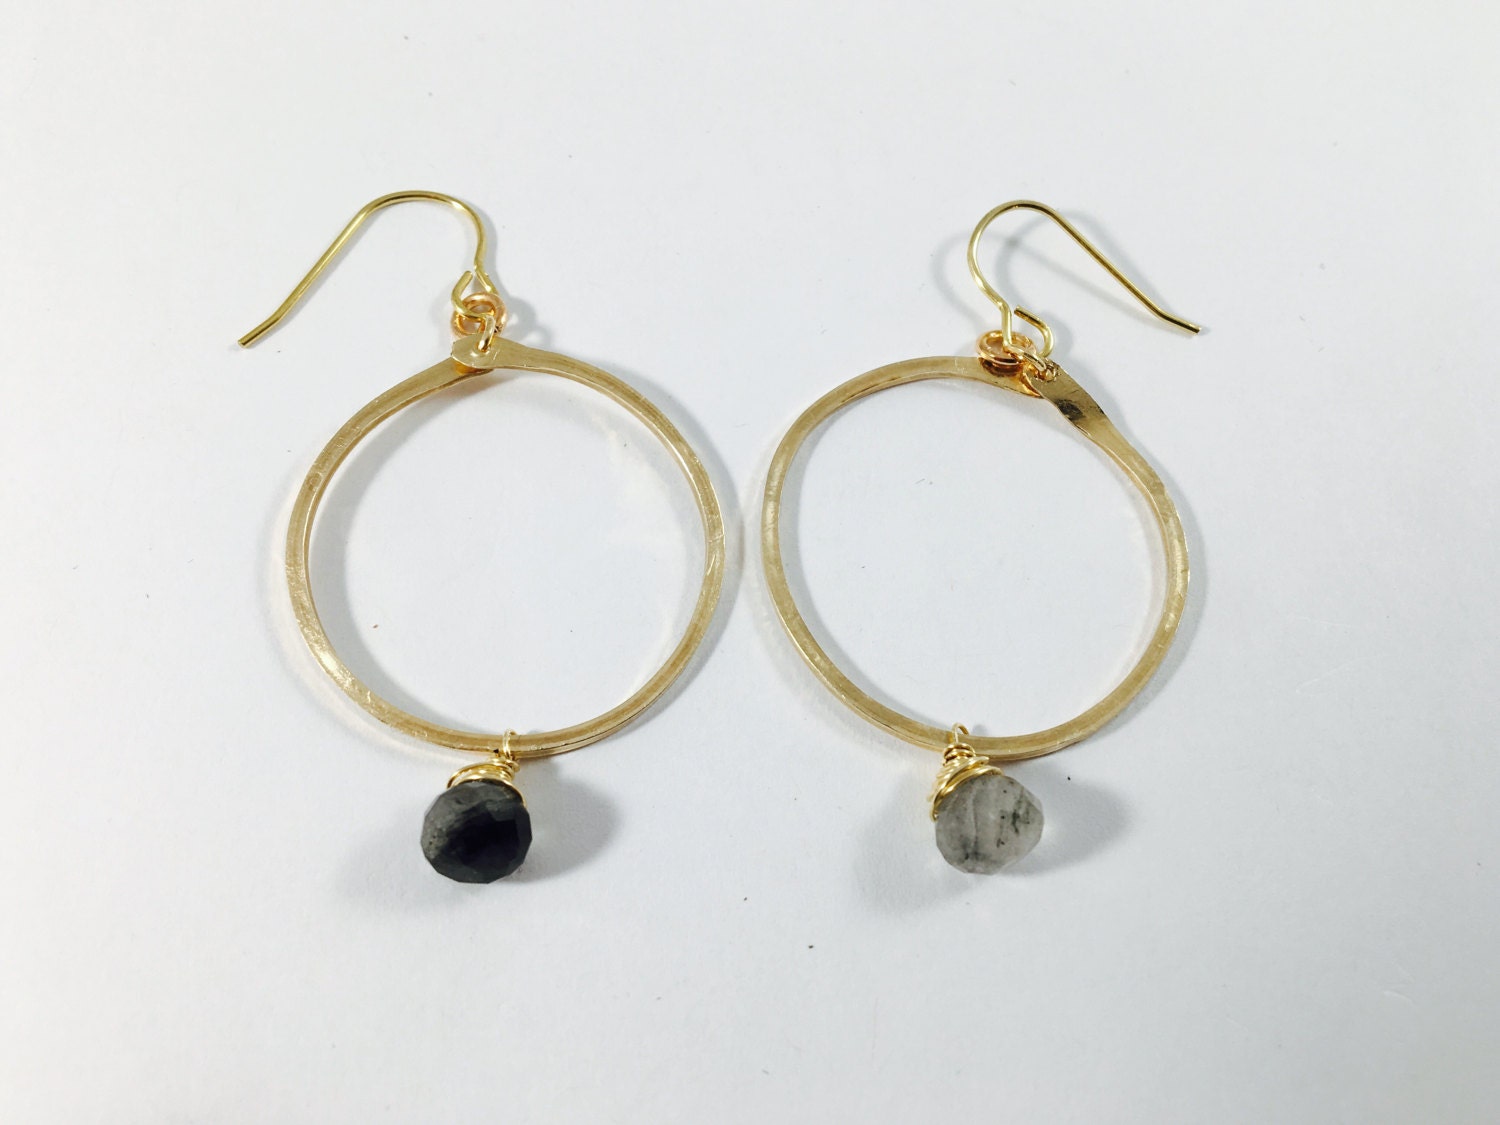 Gold fill hammered hoops// earrings// rutilated quartz// gold hoops// hammered gold earrings// giftsforher//minimalist jewelry